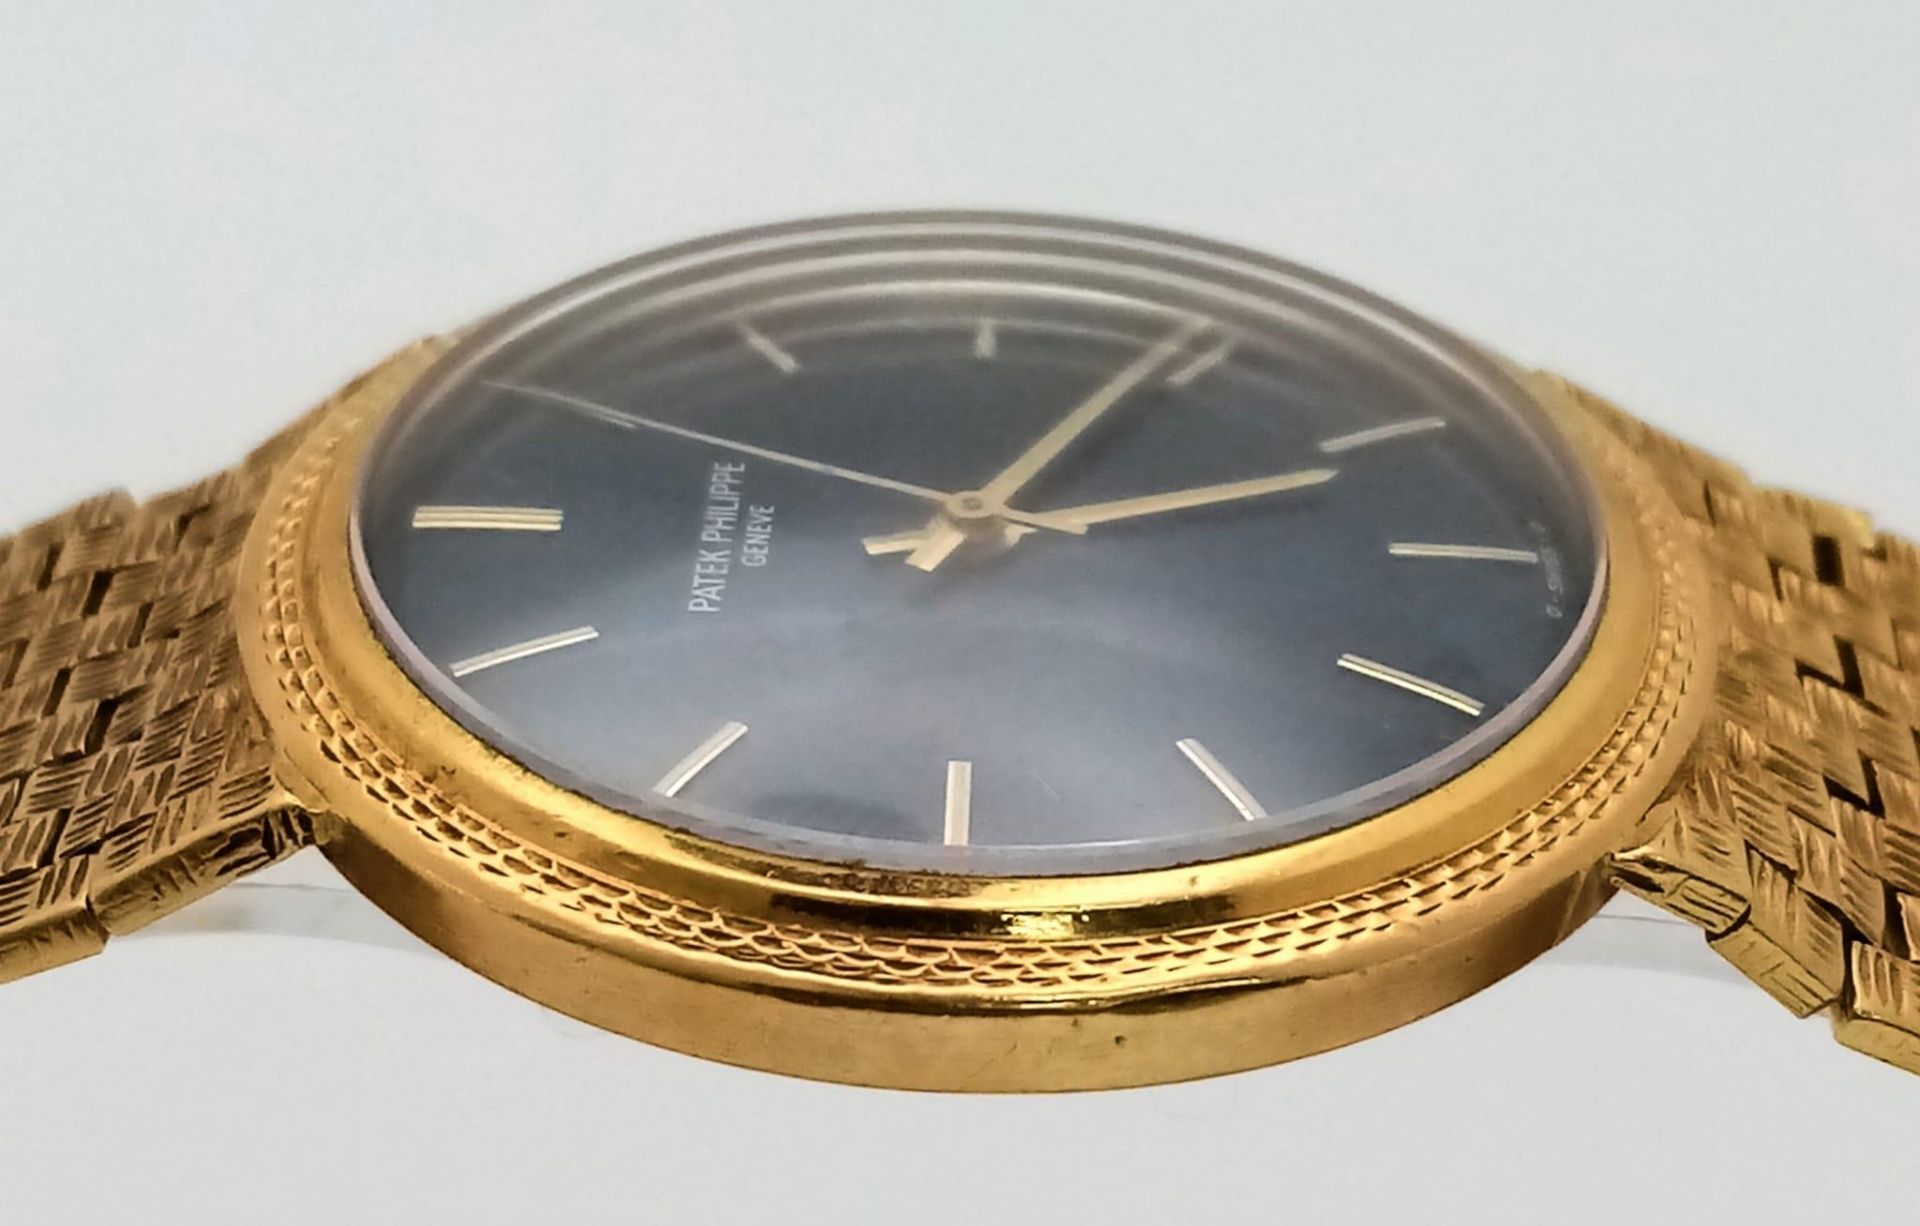 A SHOW STOPPING 18K GOLD PATEK PHILIPPE GENTS WATCH WITH BLOCK LINK SOLID 18K GOLD STRAP, AMAZING - Image 5 of 8